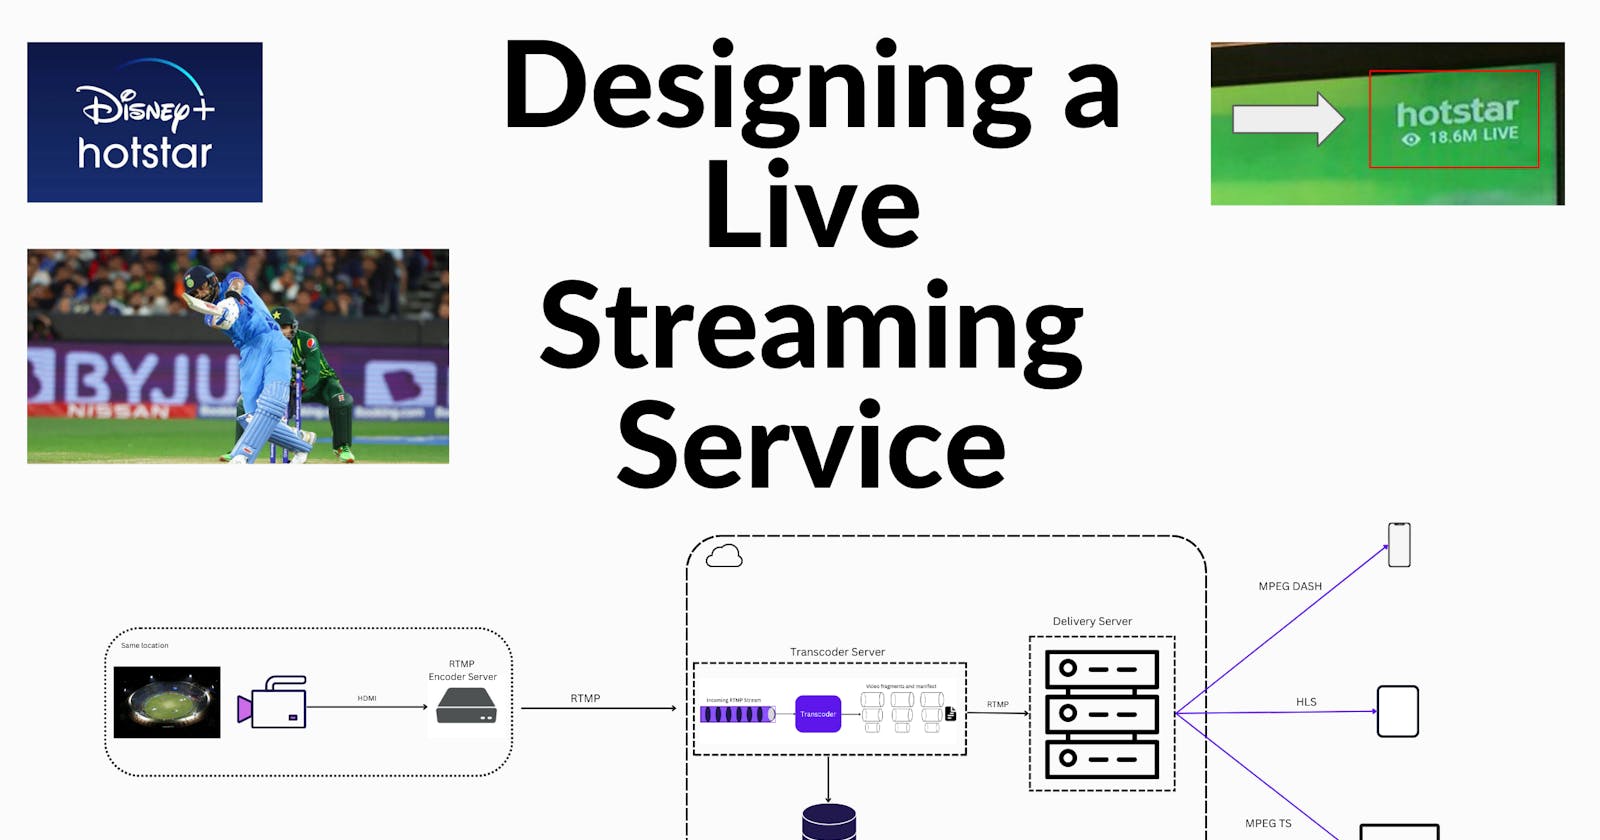 How to design a Live Video Streaming service like Disney HotStar